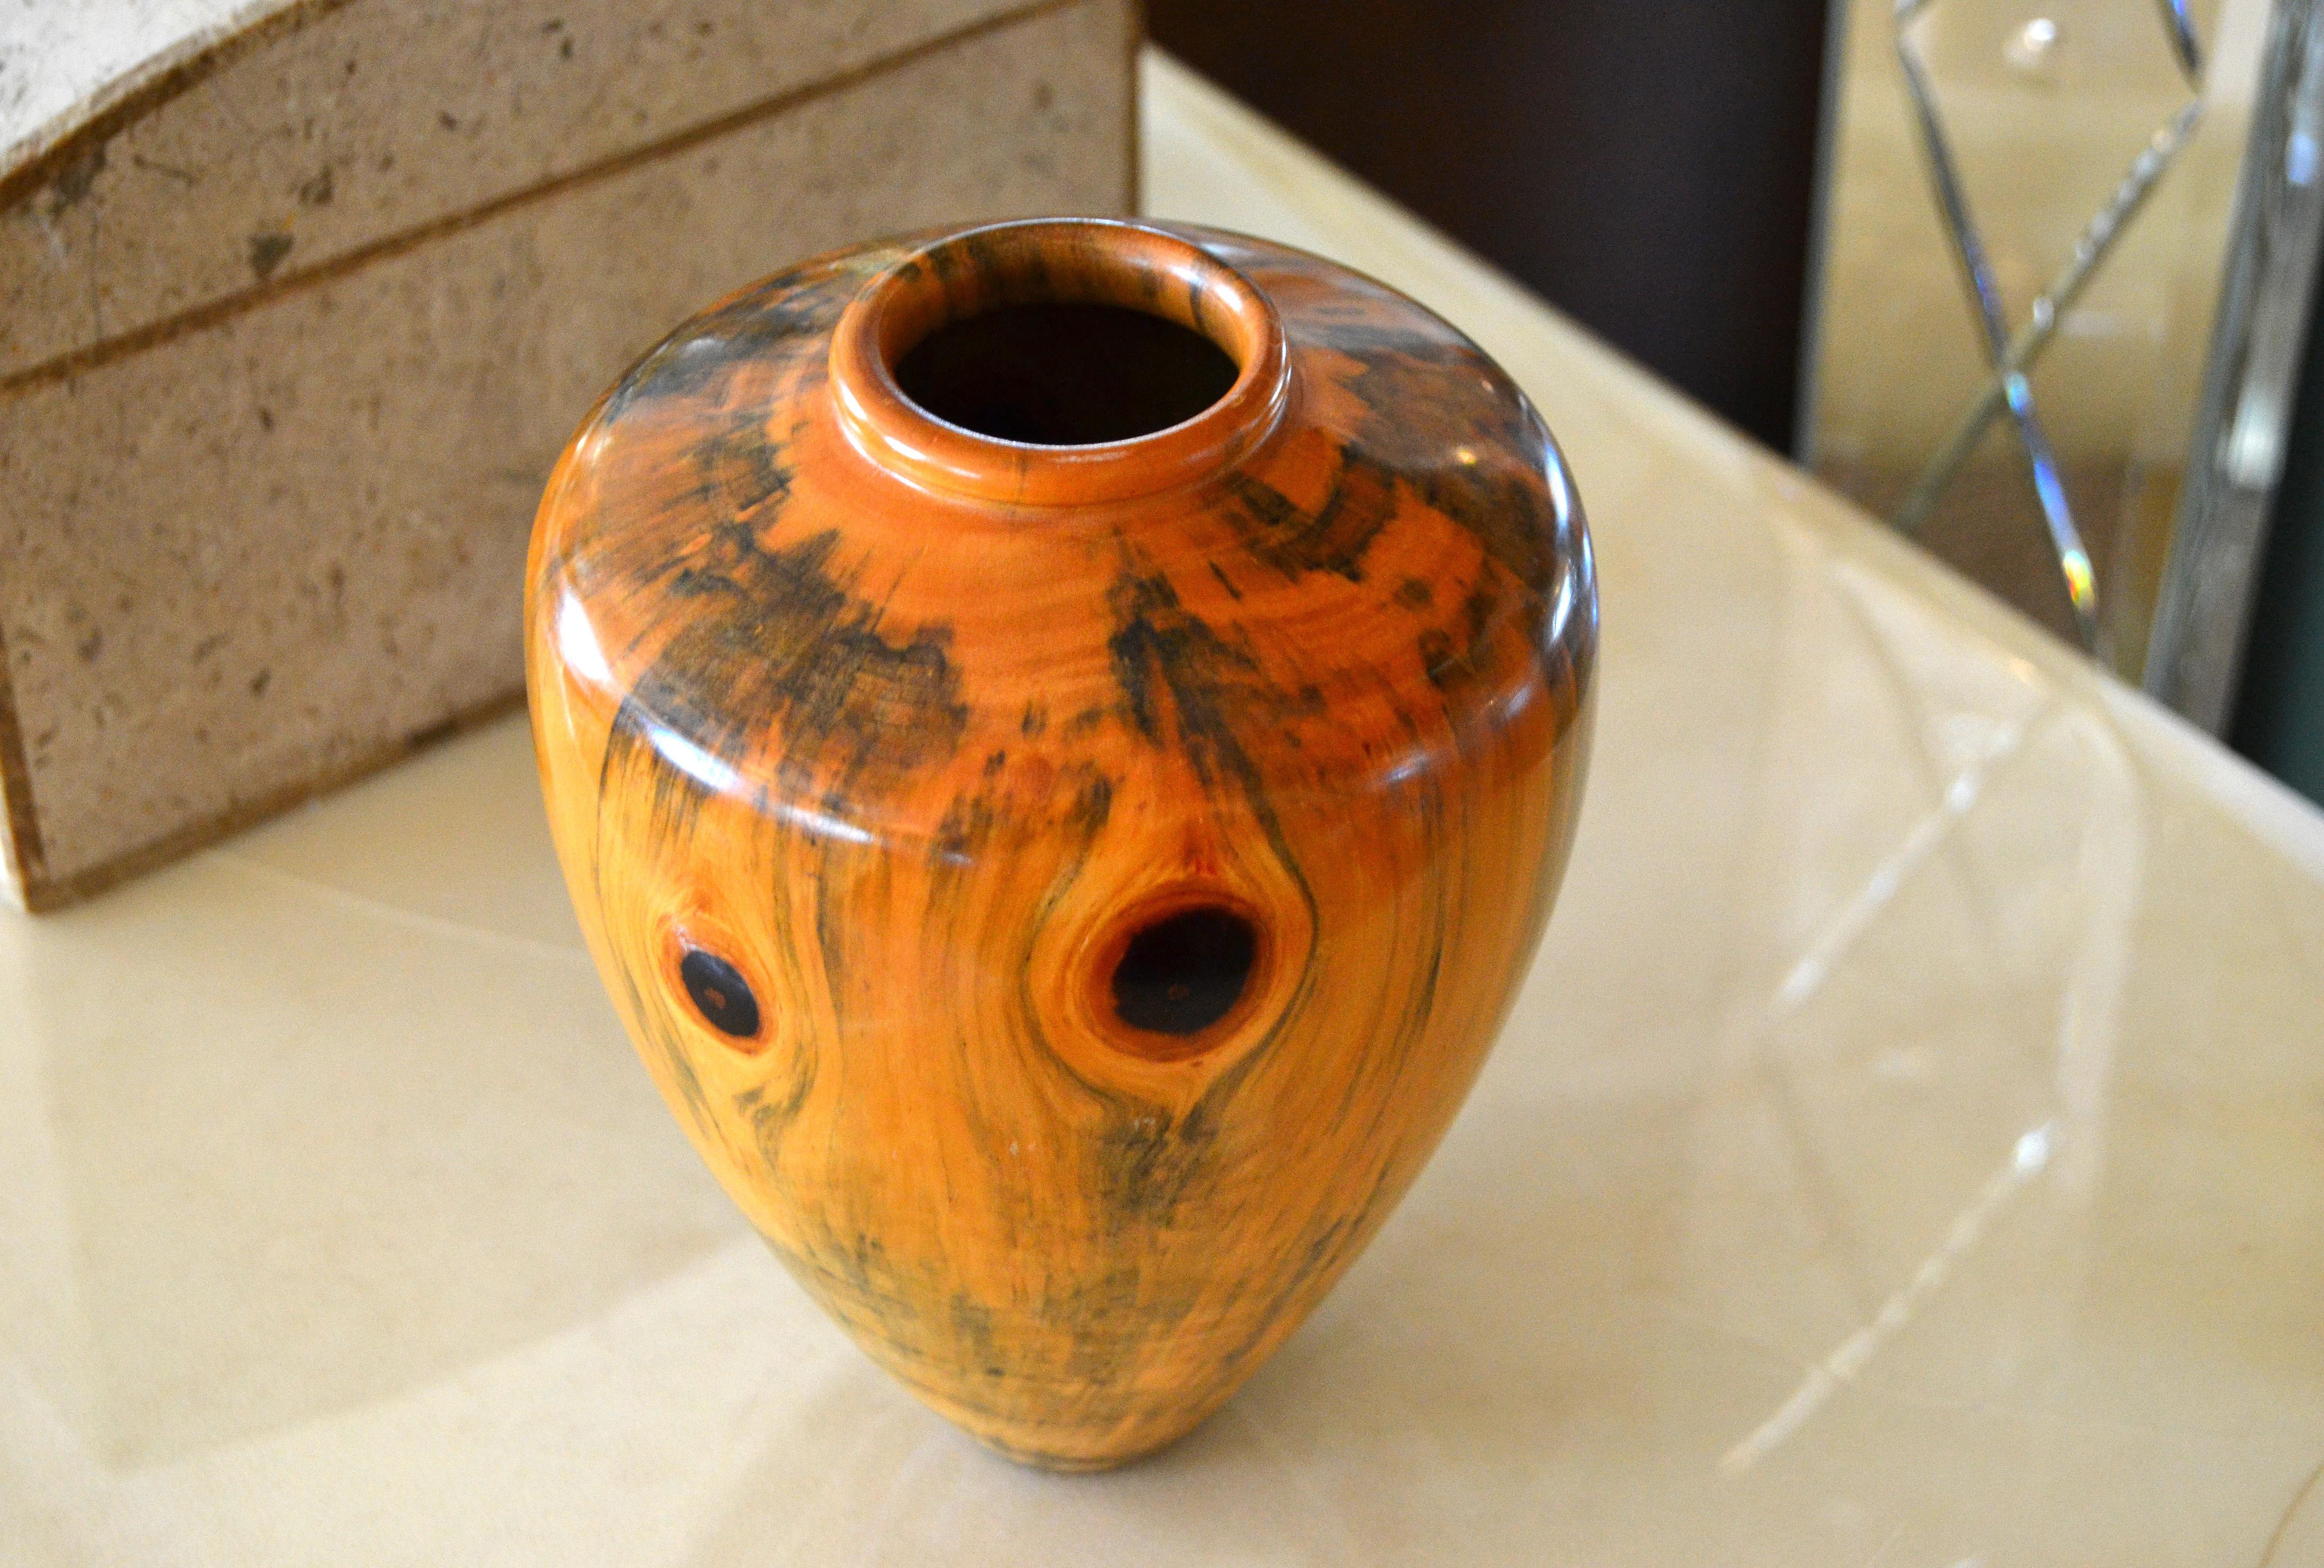 American Craftsman Carl Spinner Decorative American Handcrafted Exotic Turned Wood Lacquered Vase